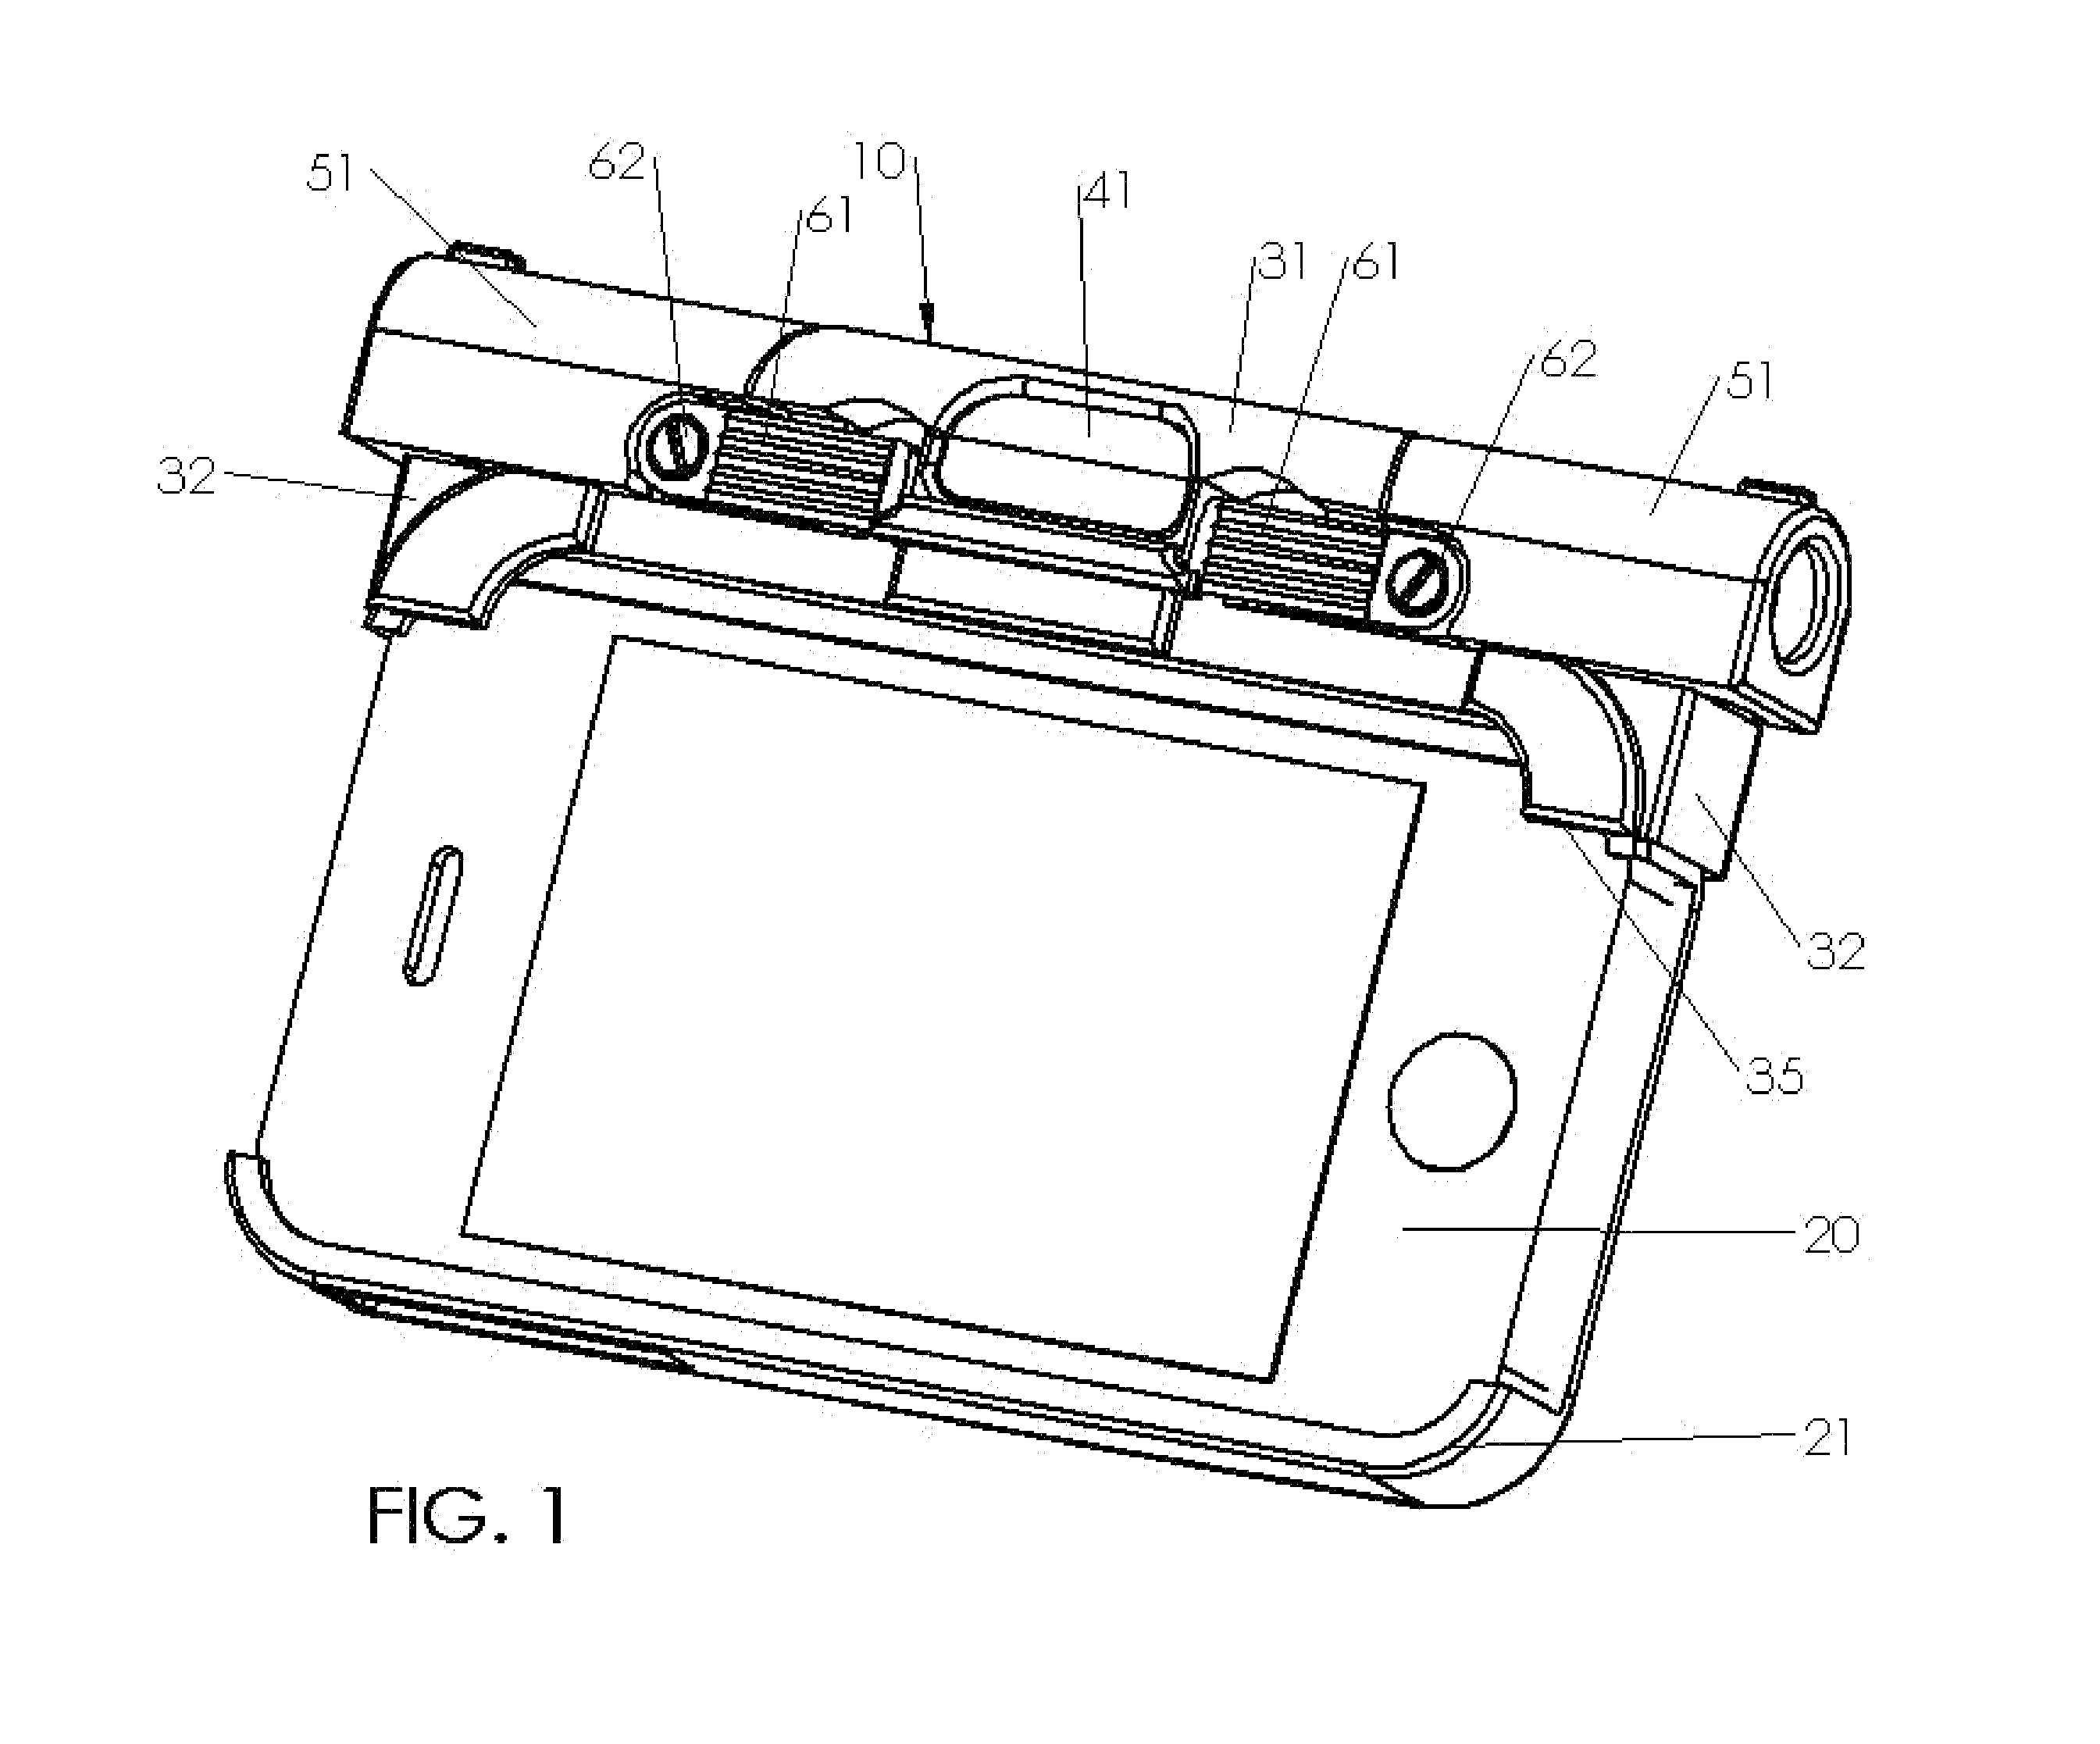 Multi-touch input device